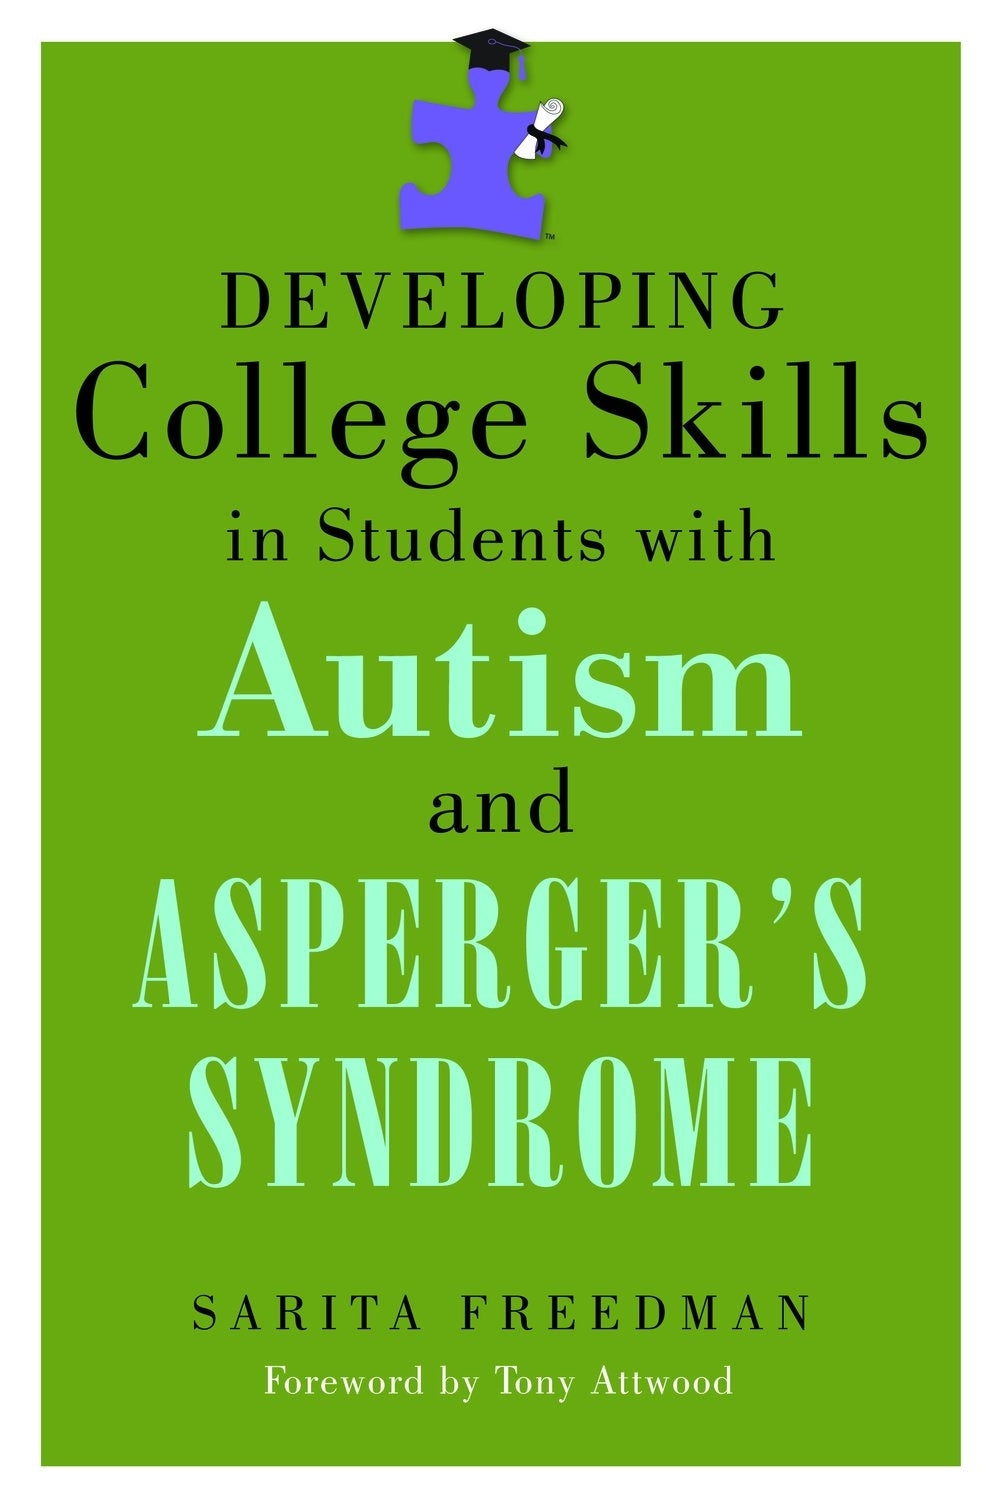 Developing College Skills in Students with Autism and Asperger's Syndrome by Sarita Freedman, Dr Anthony Attwood